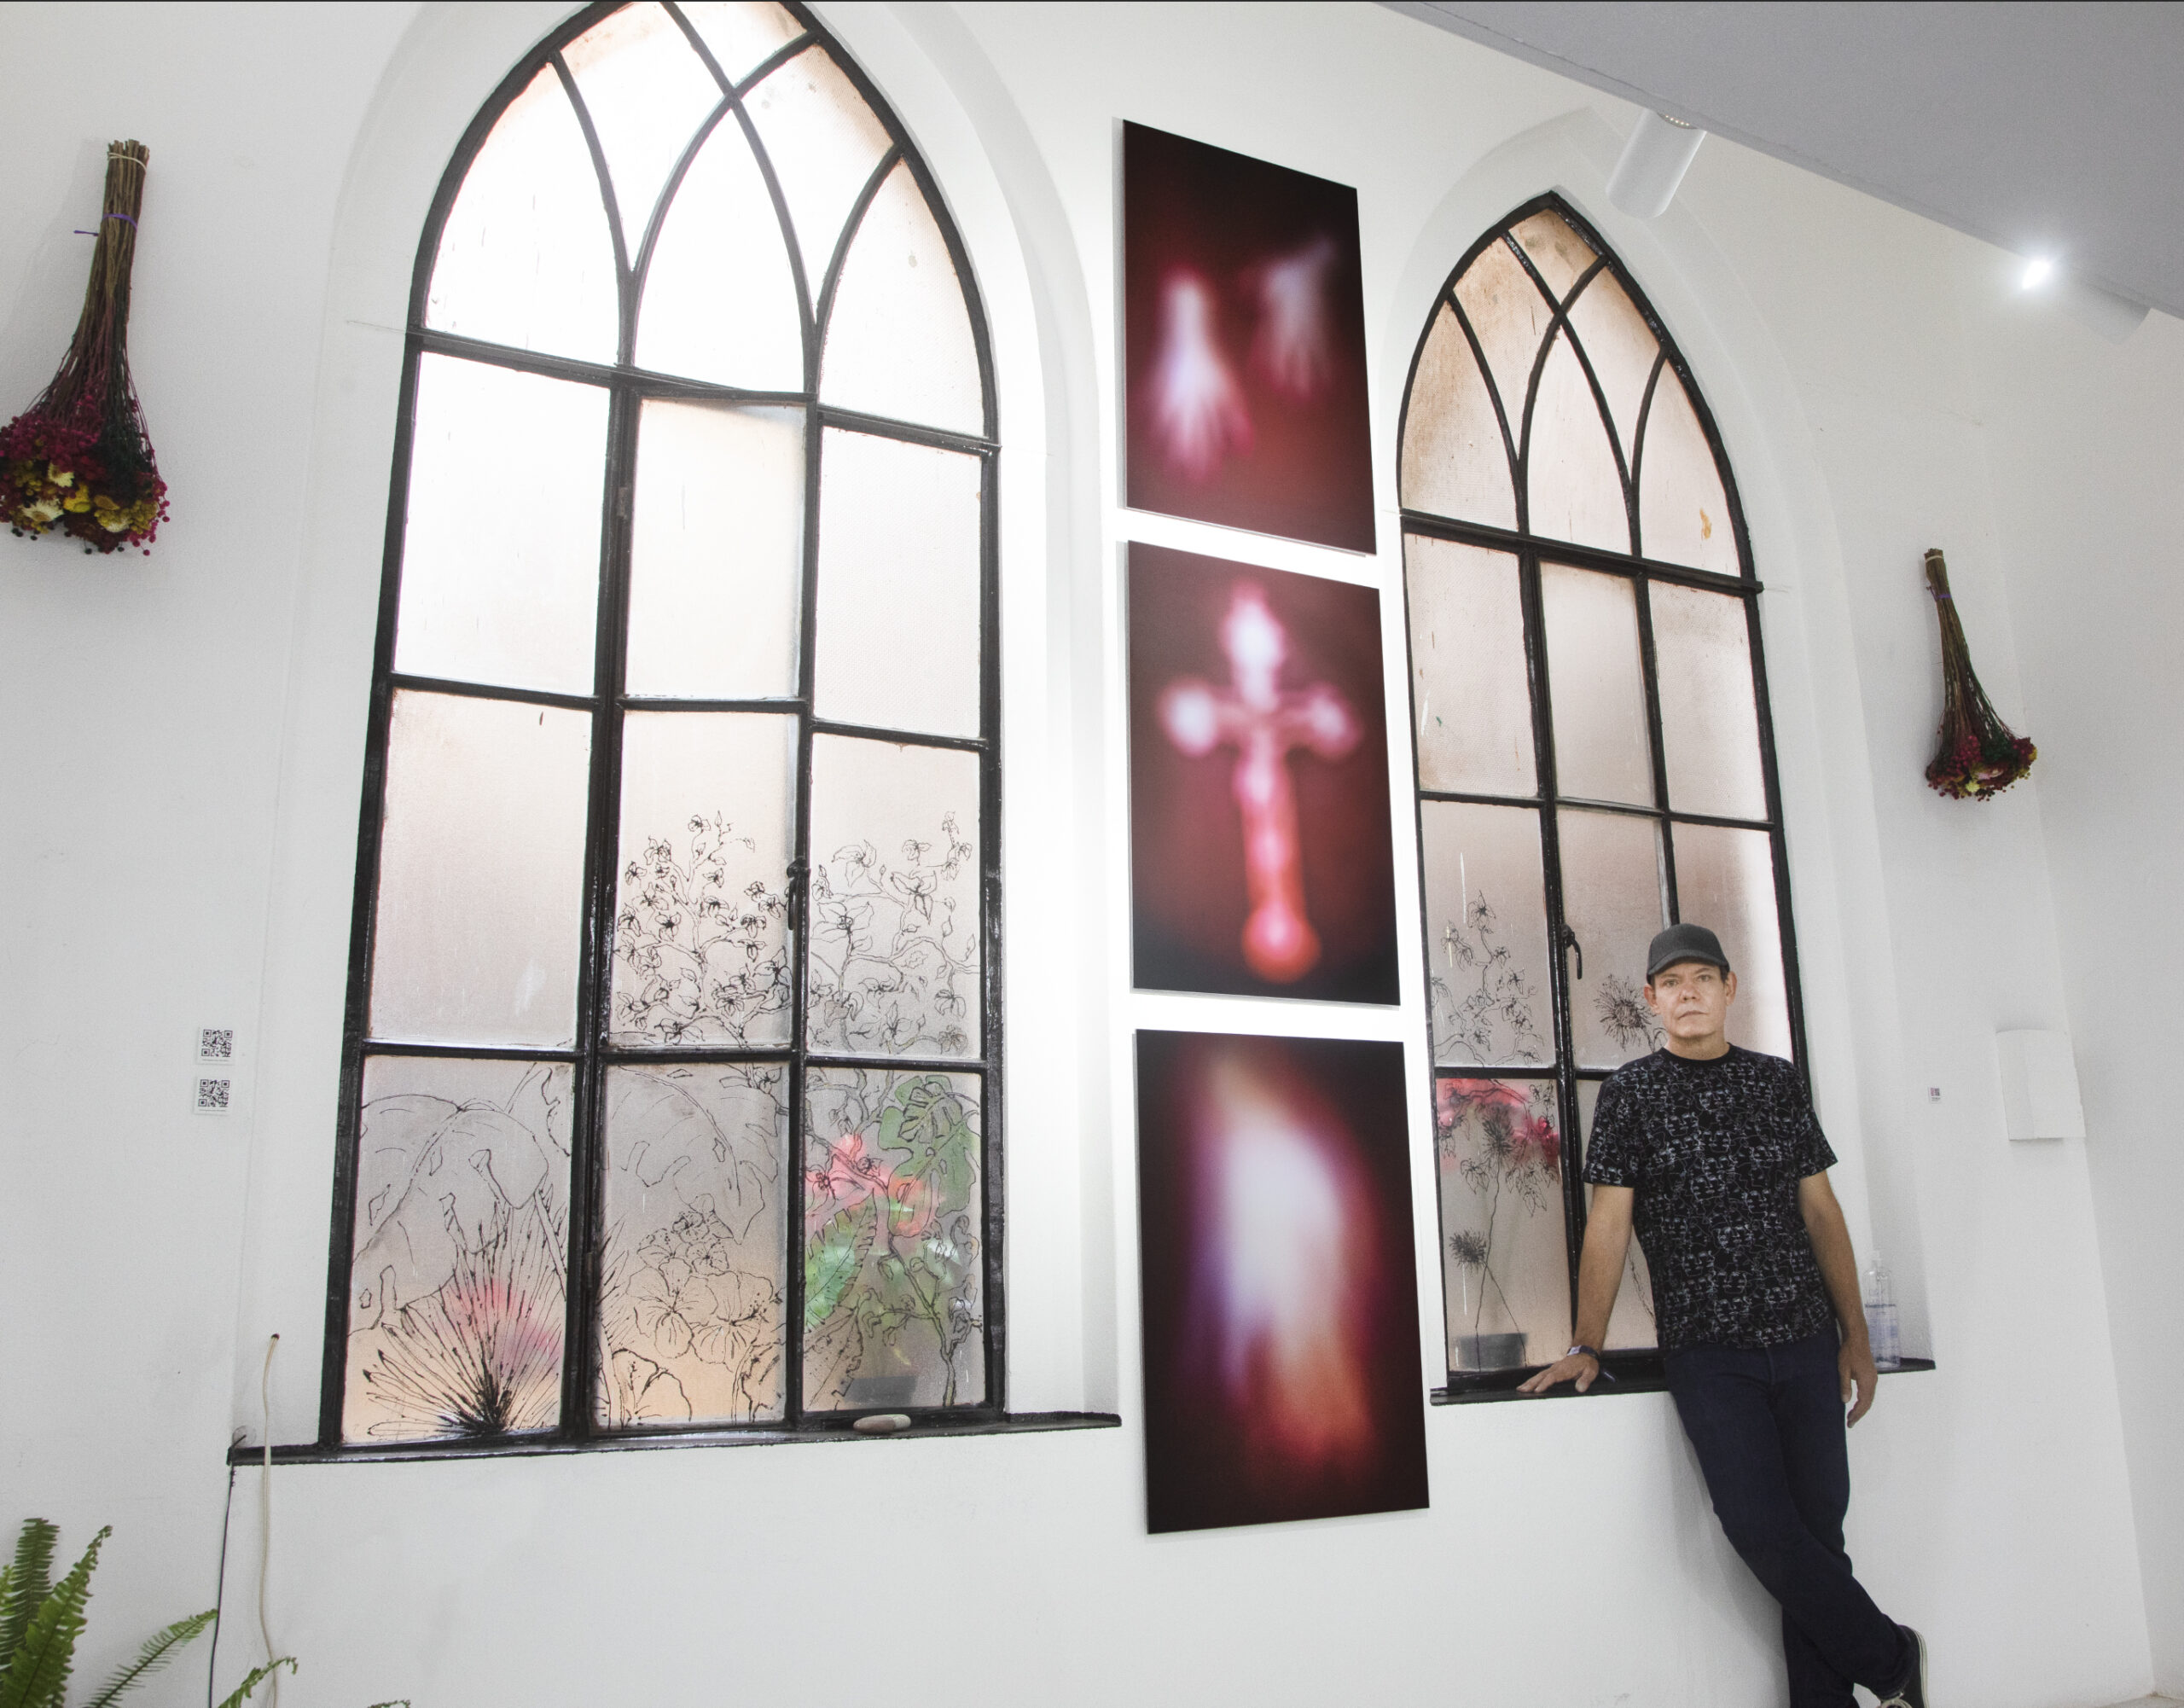 Chapel windows interior with white walls marooc red vertical image floor to ceiling hang between the windows. Showing the hands of God, A crucific and the holy spirit form or shape. 